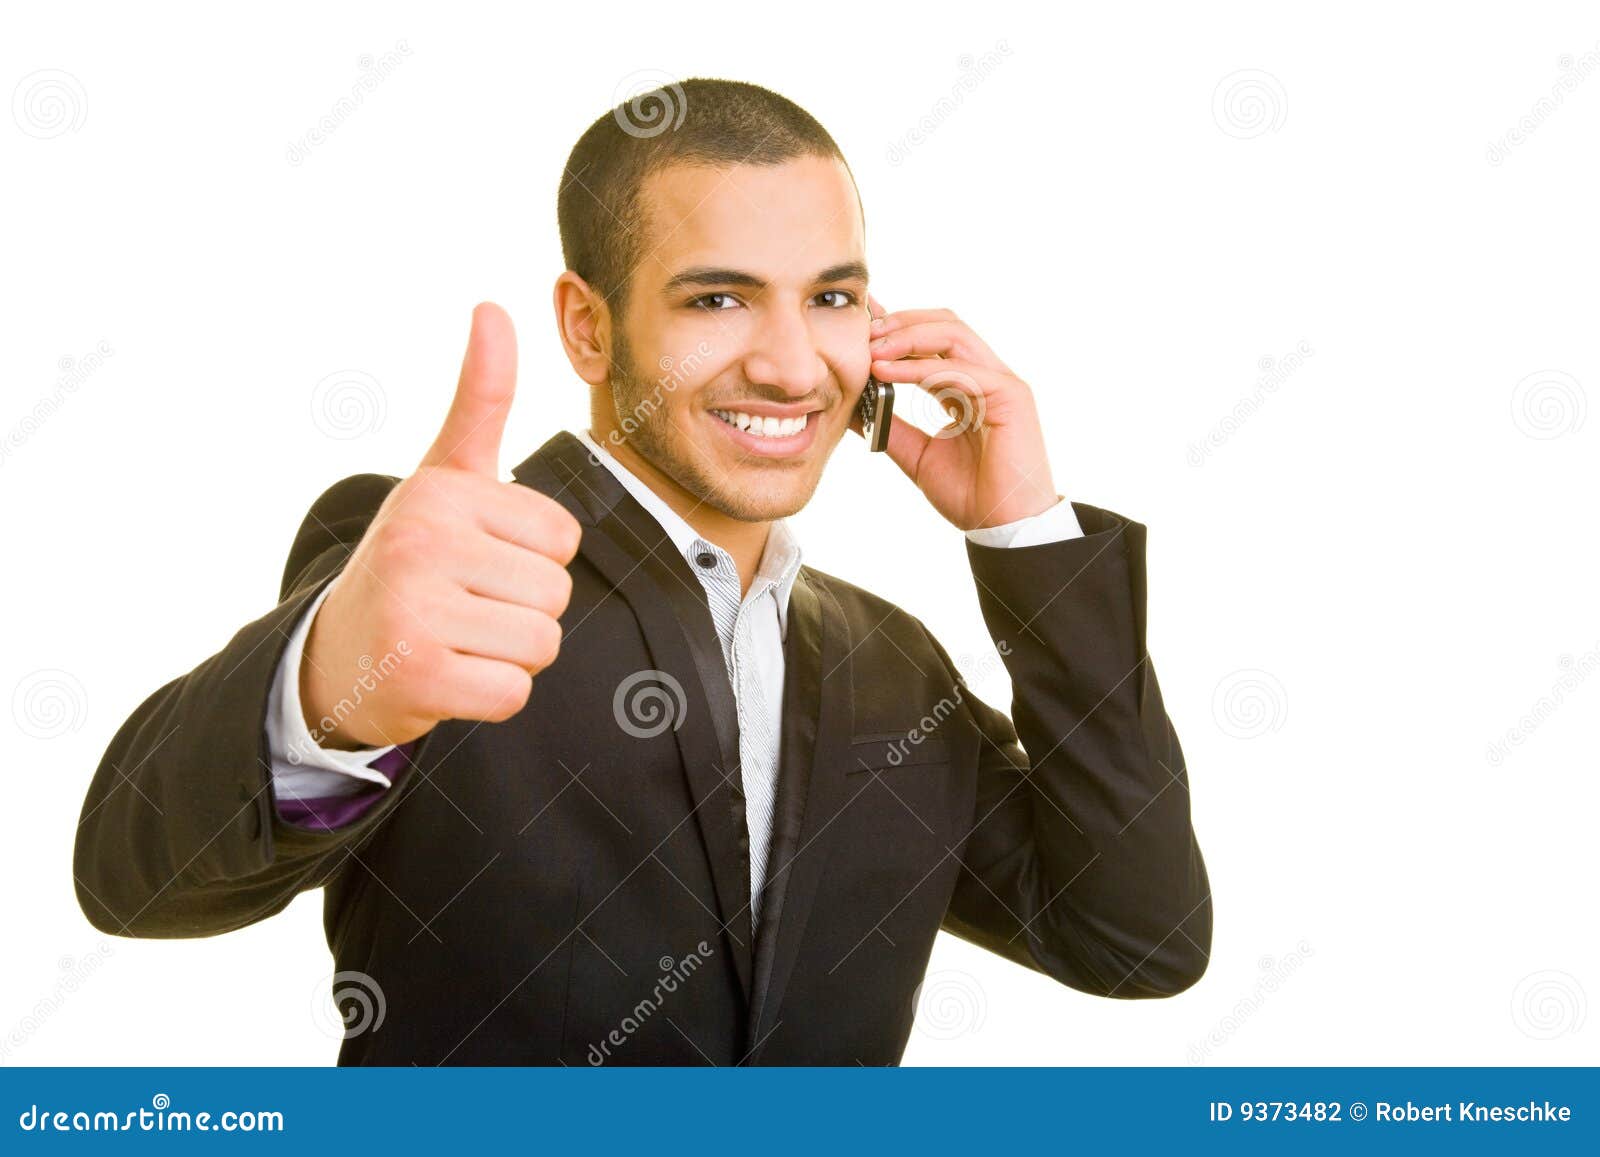 Man using cell phone stock photo. Image of business, laughing - 9373482